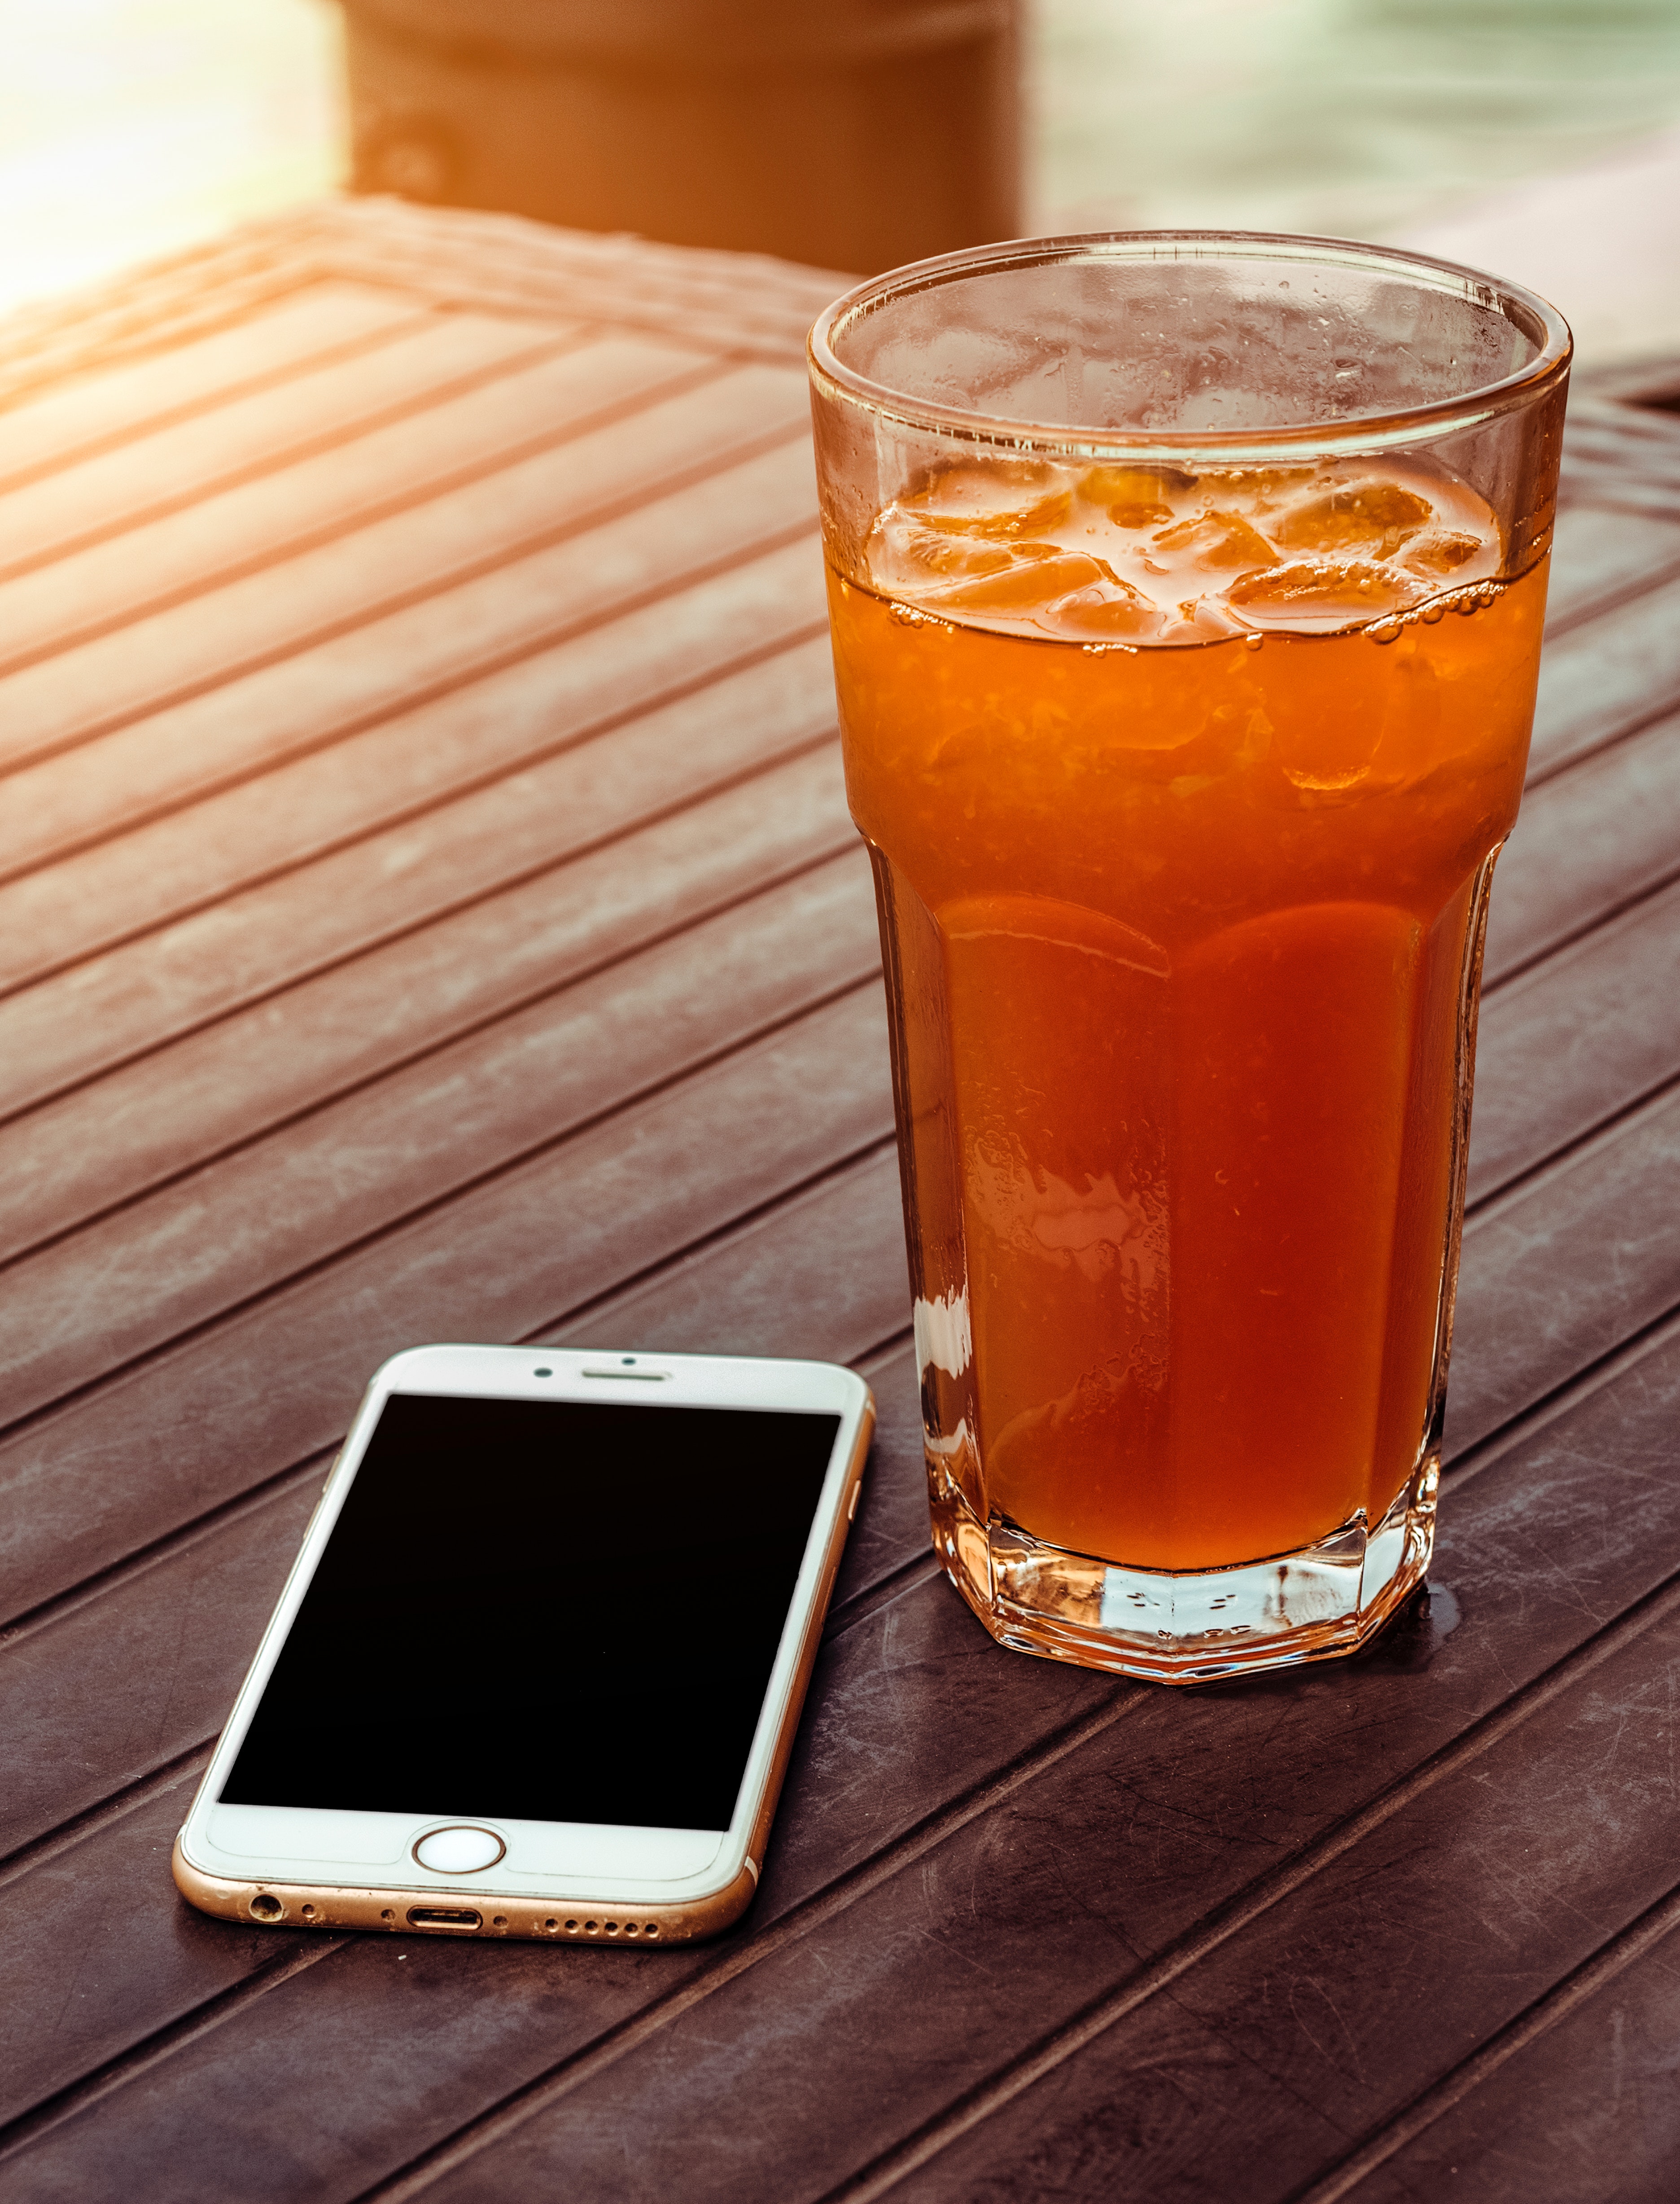 Orange juice in clear drinking glass besides gold iphone 6 on brown wooden table photo